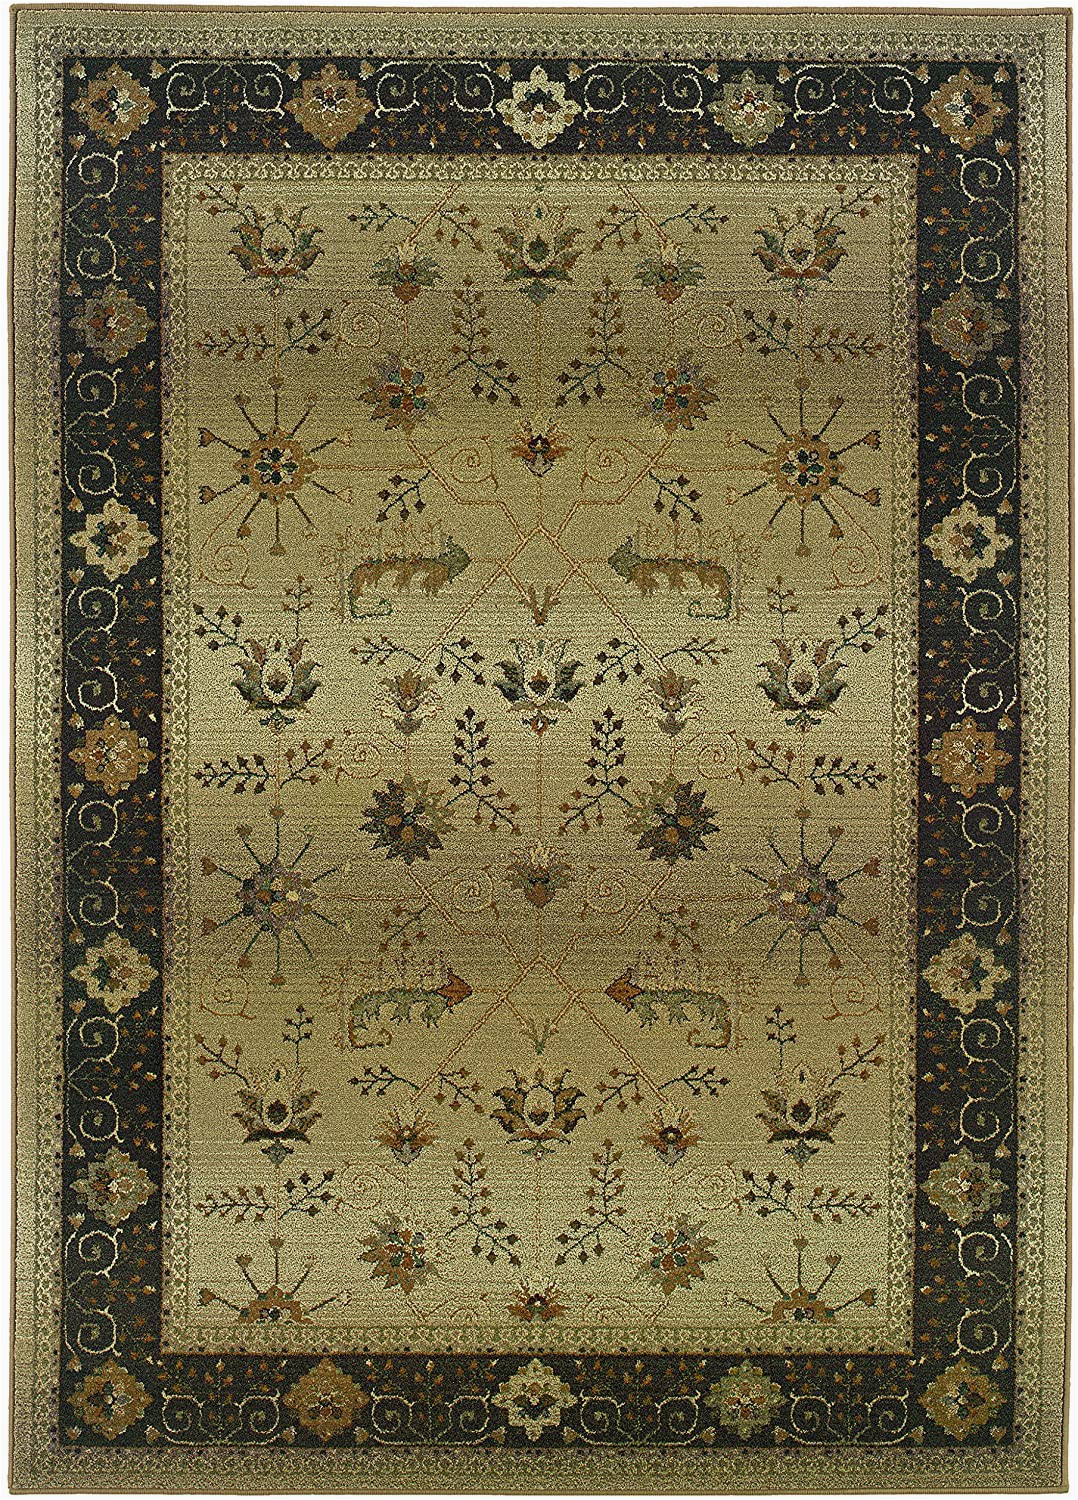 8 Ft X 8 Ft Square area Rug Traditional Genesis Tan 8ft Square area Rug Amazon